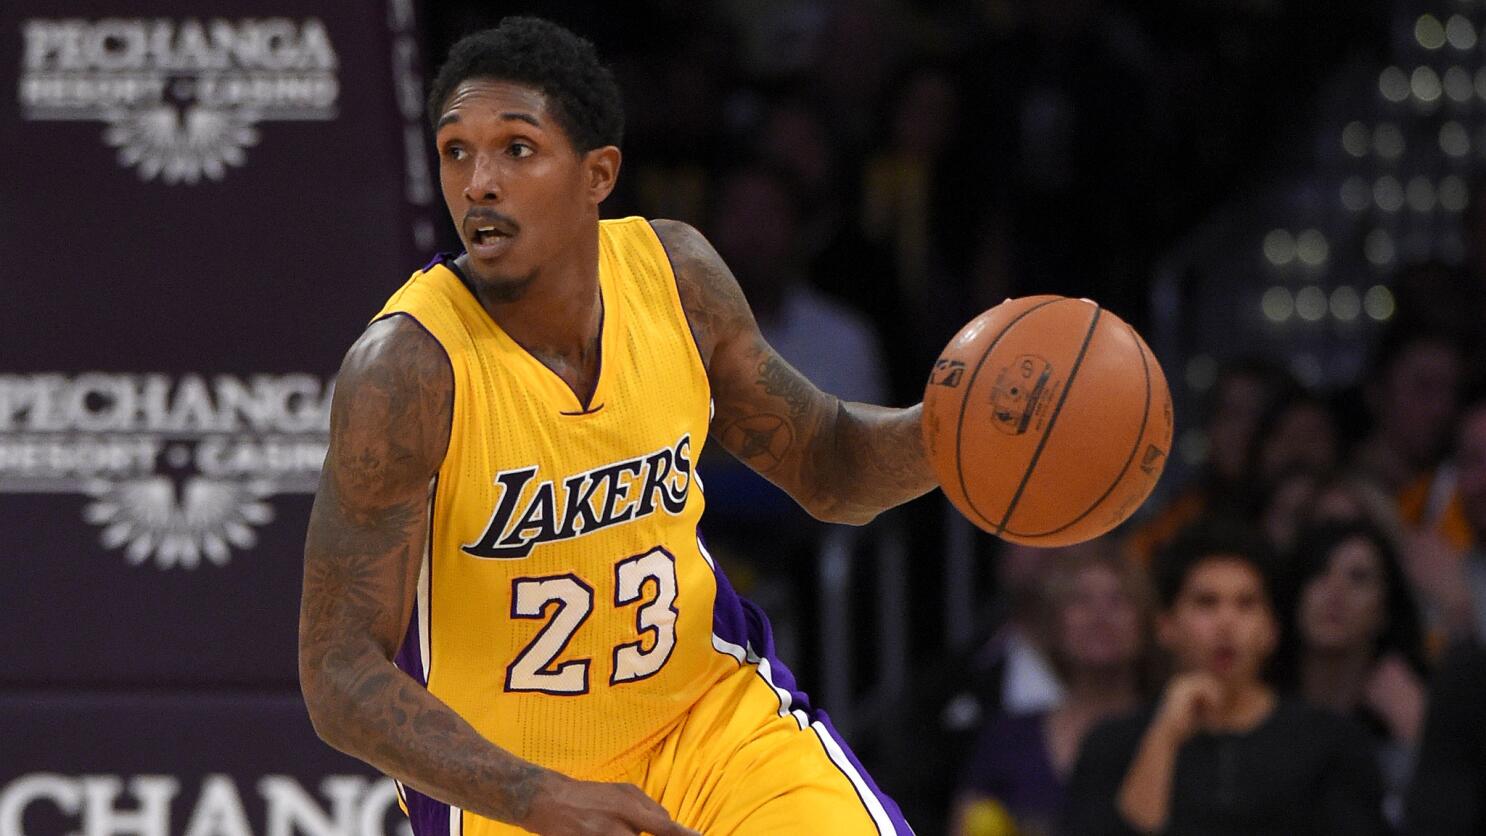 Los Angeles Lakers' Lou Williams goes up for the last shot of the game  against the Minnesota Timberwolves at Staples Center in Los Angeles on  October 28, 2015. Williams missed the shot.